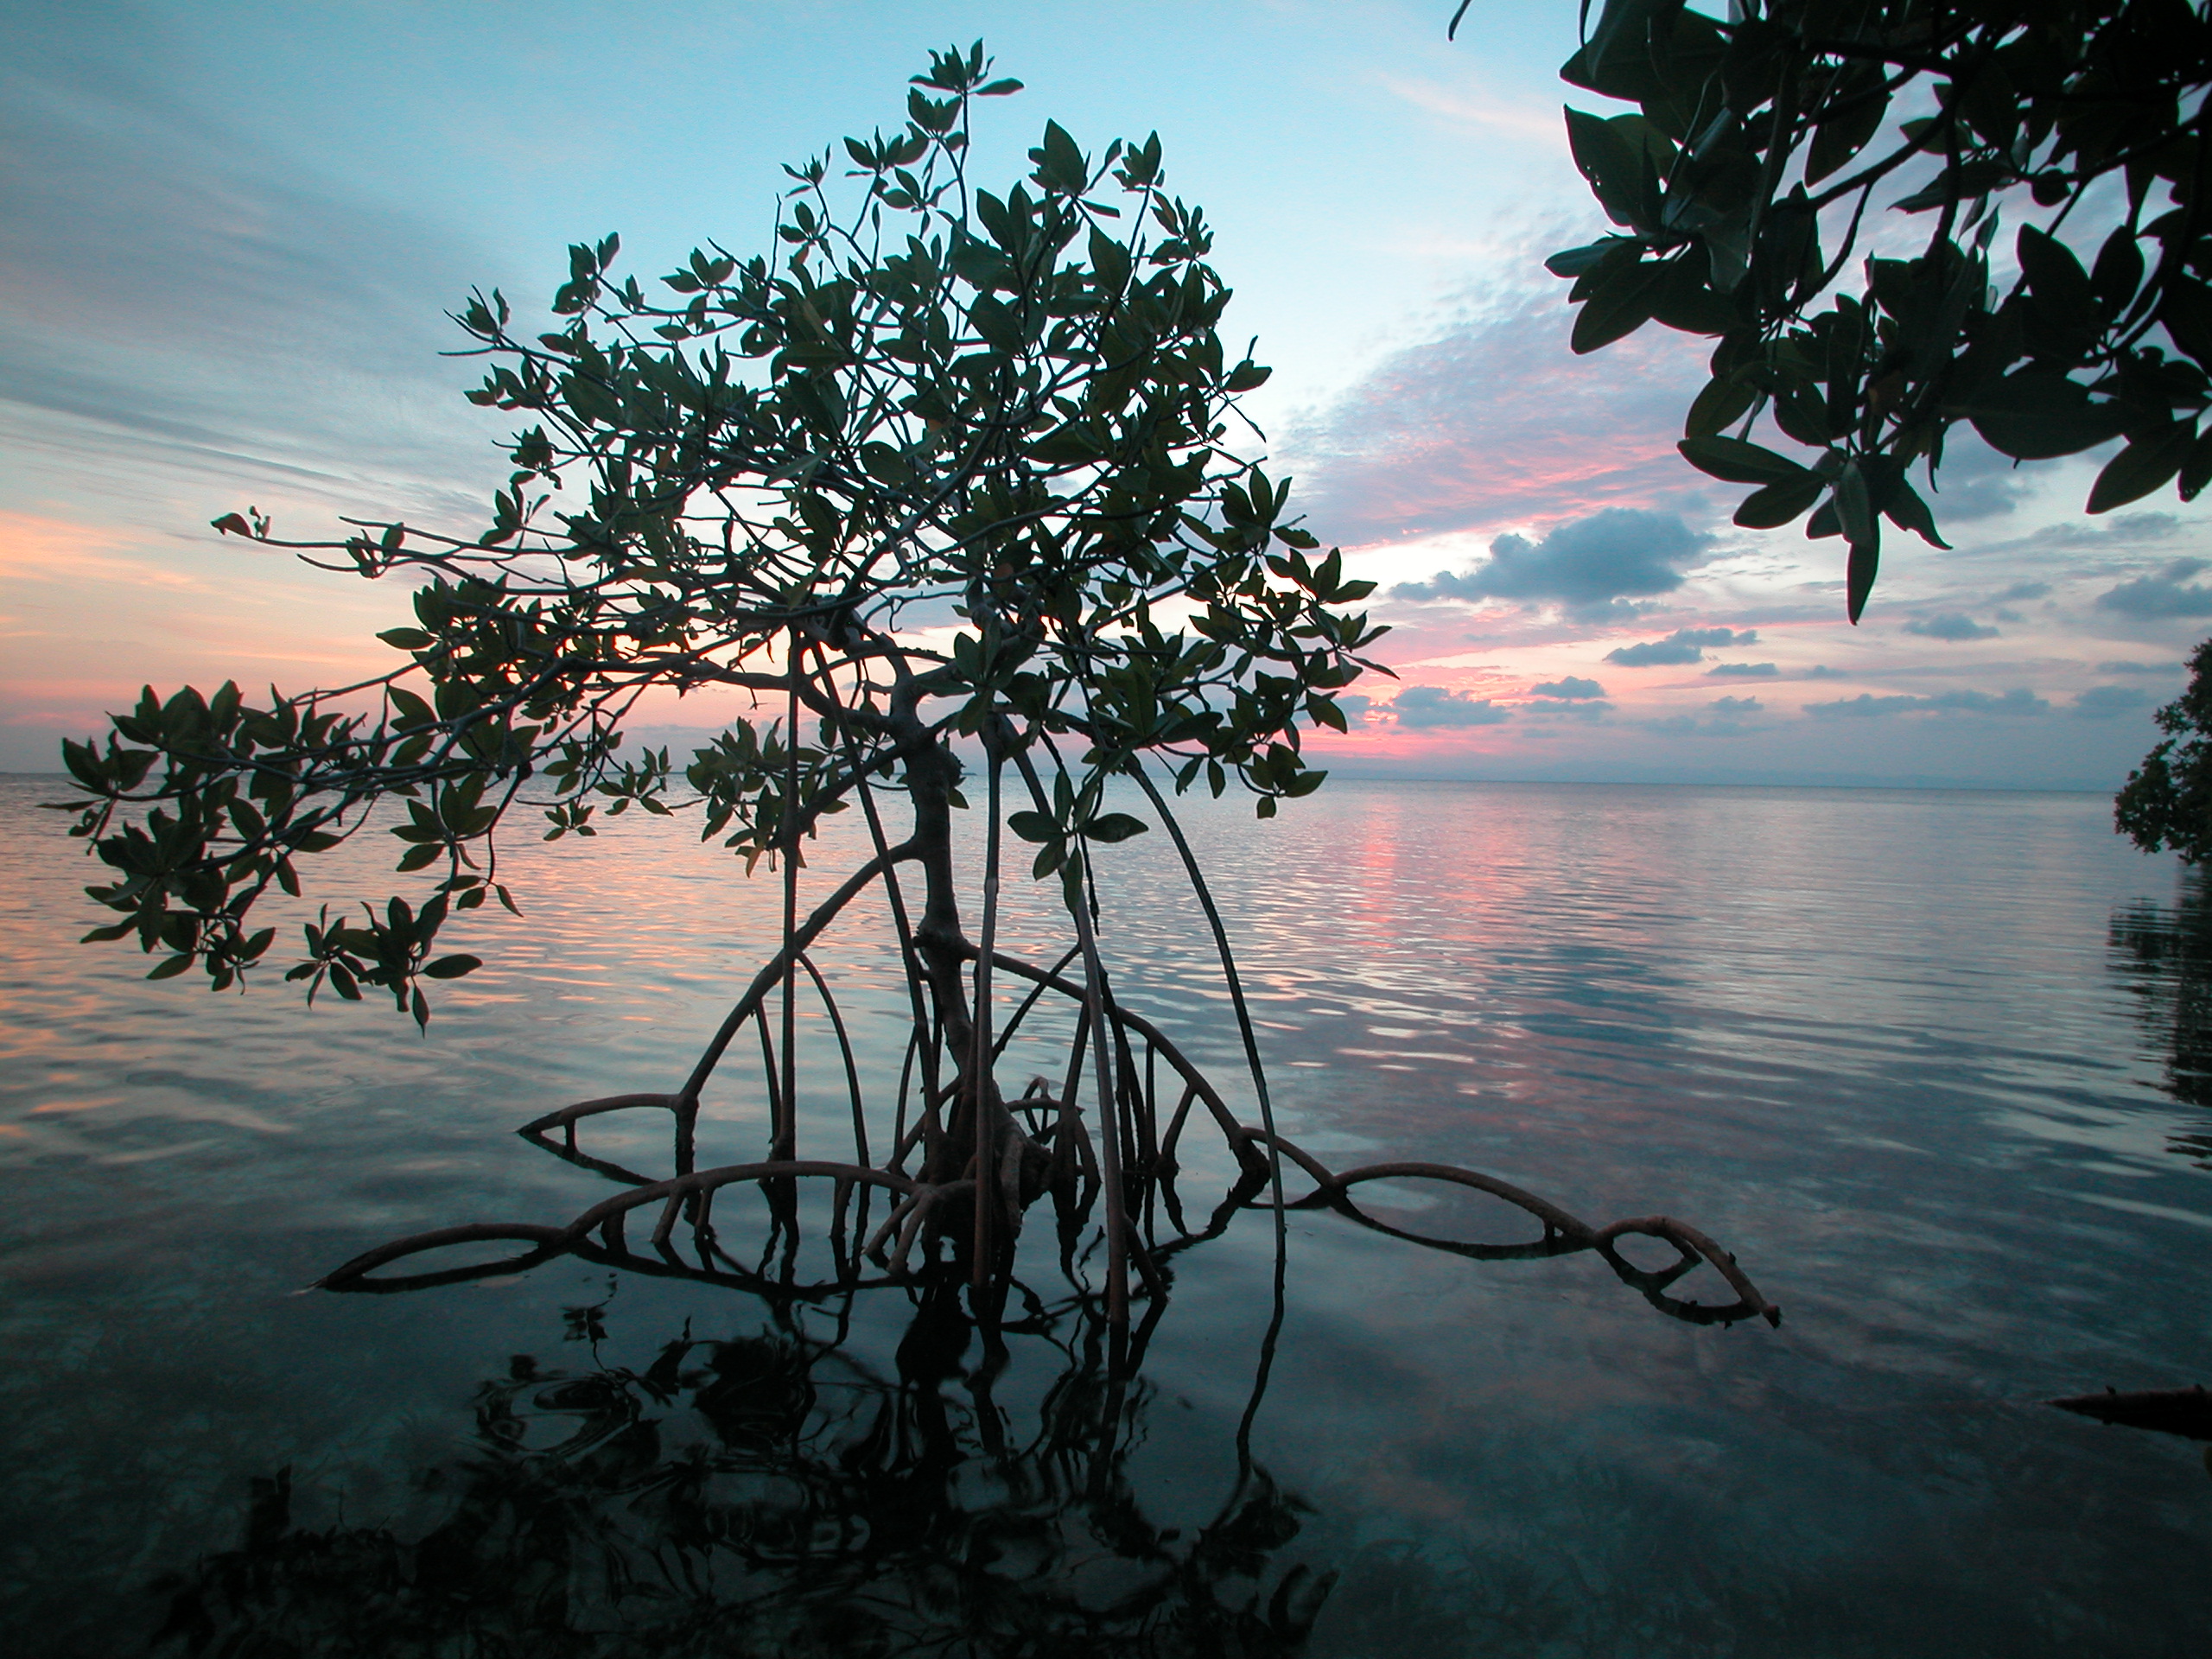 Red mangrove tree in water at sunset